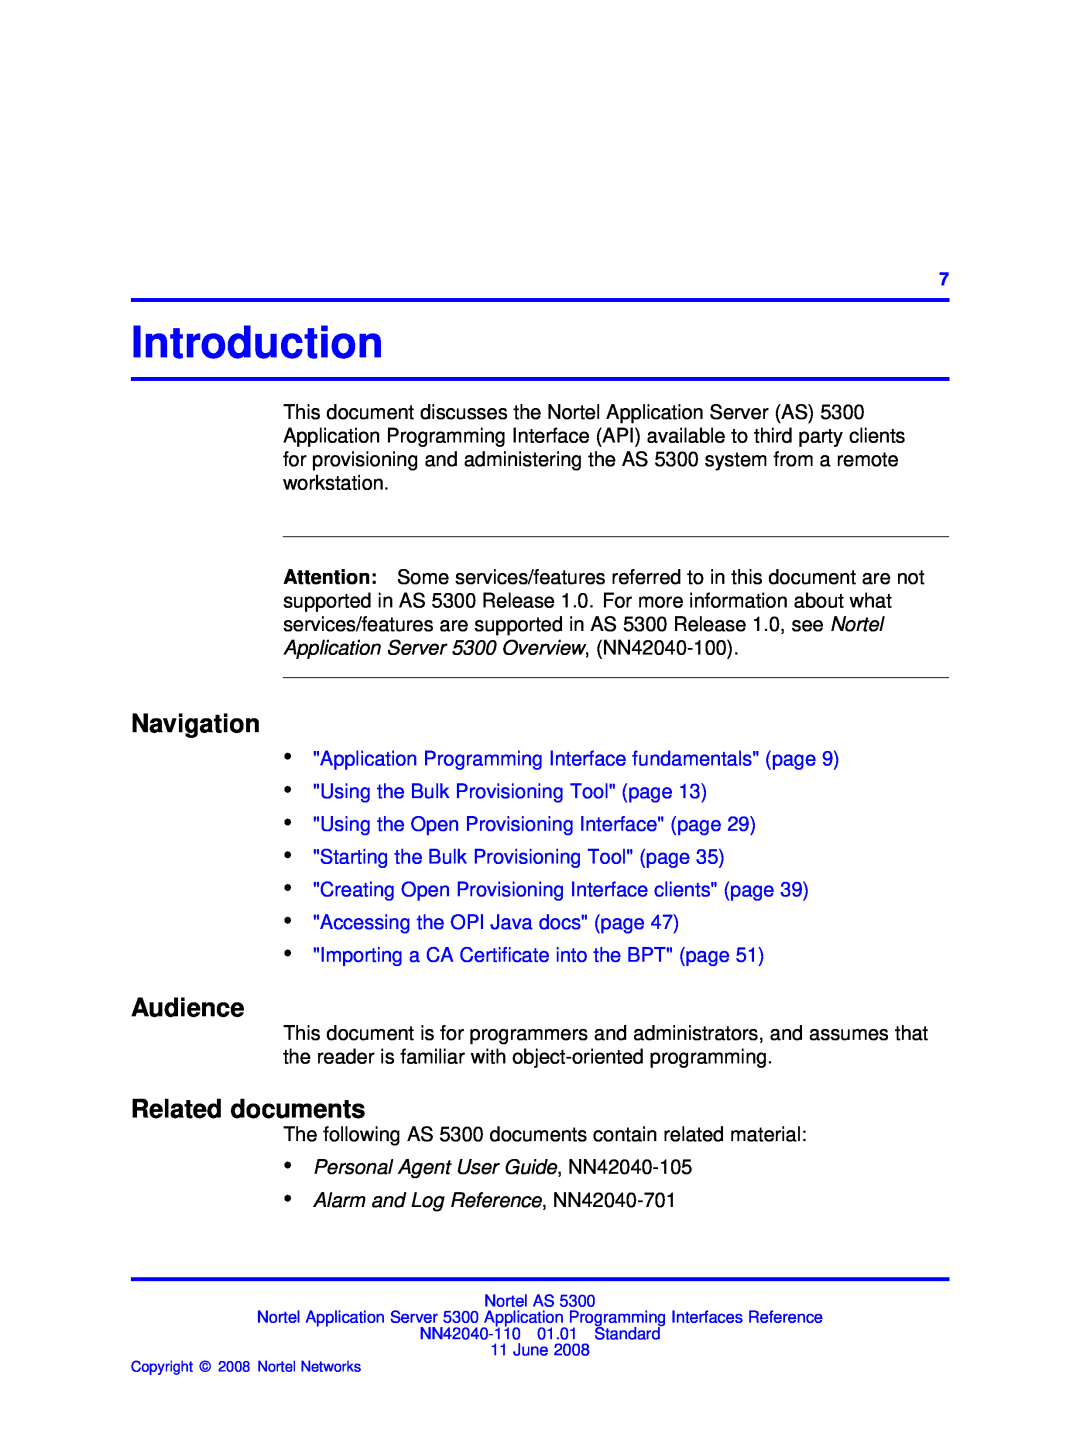 Nortel Networks AS 5300 manual Introduction, Navigation, Audience, Related documents, Using the Bulk Provisioning Tool page 